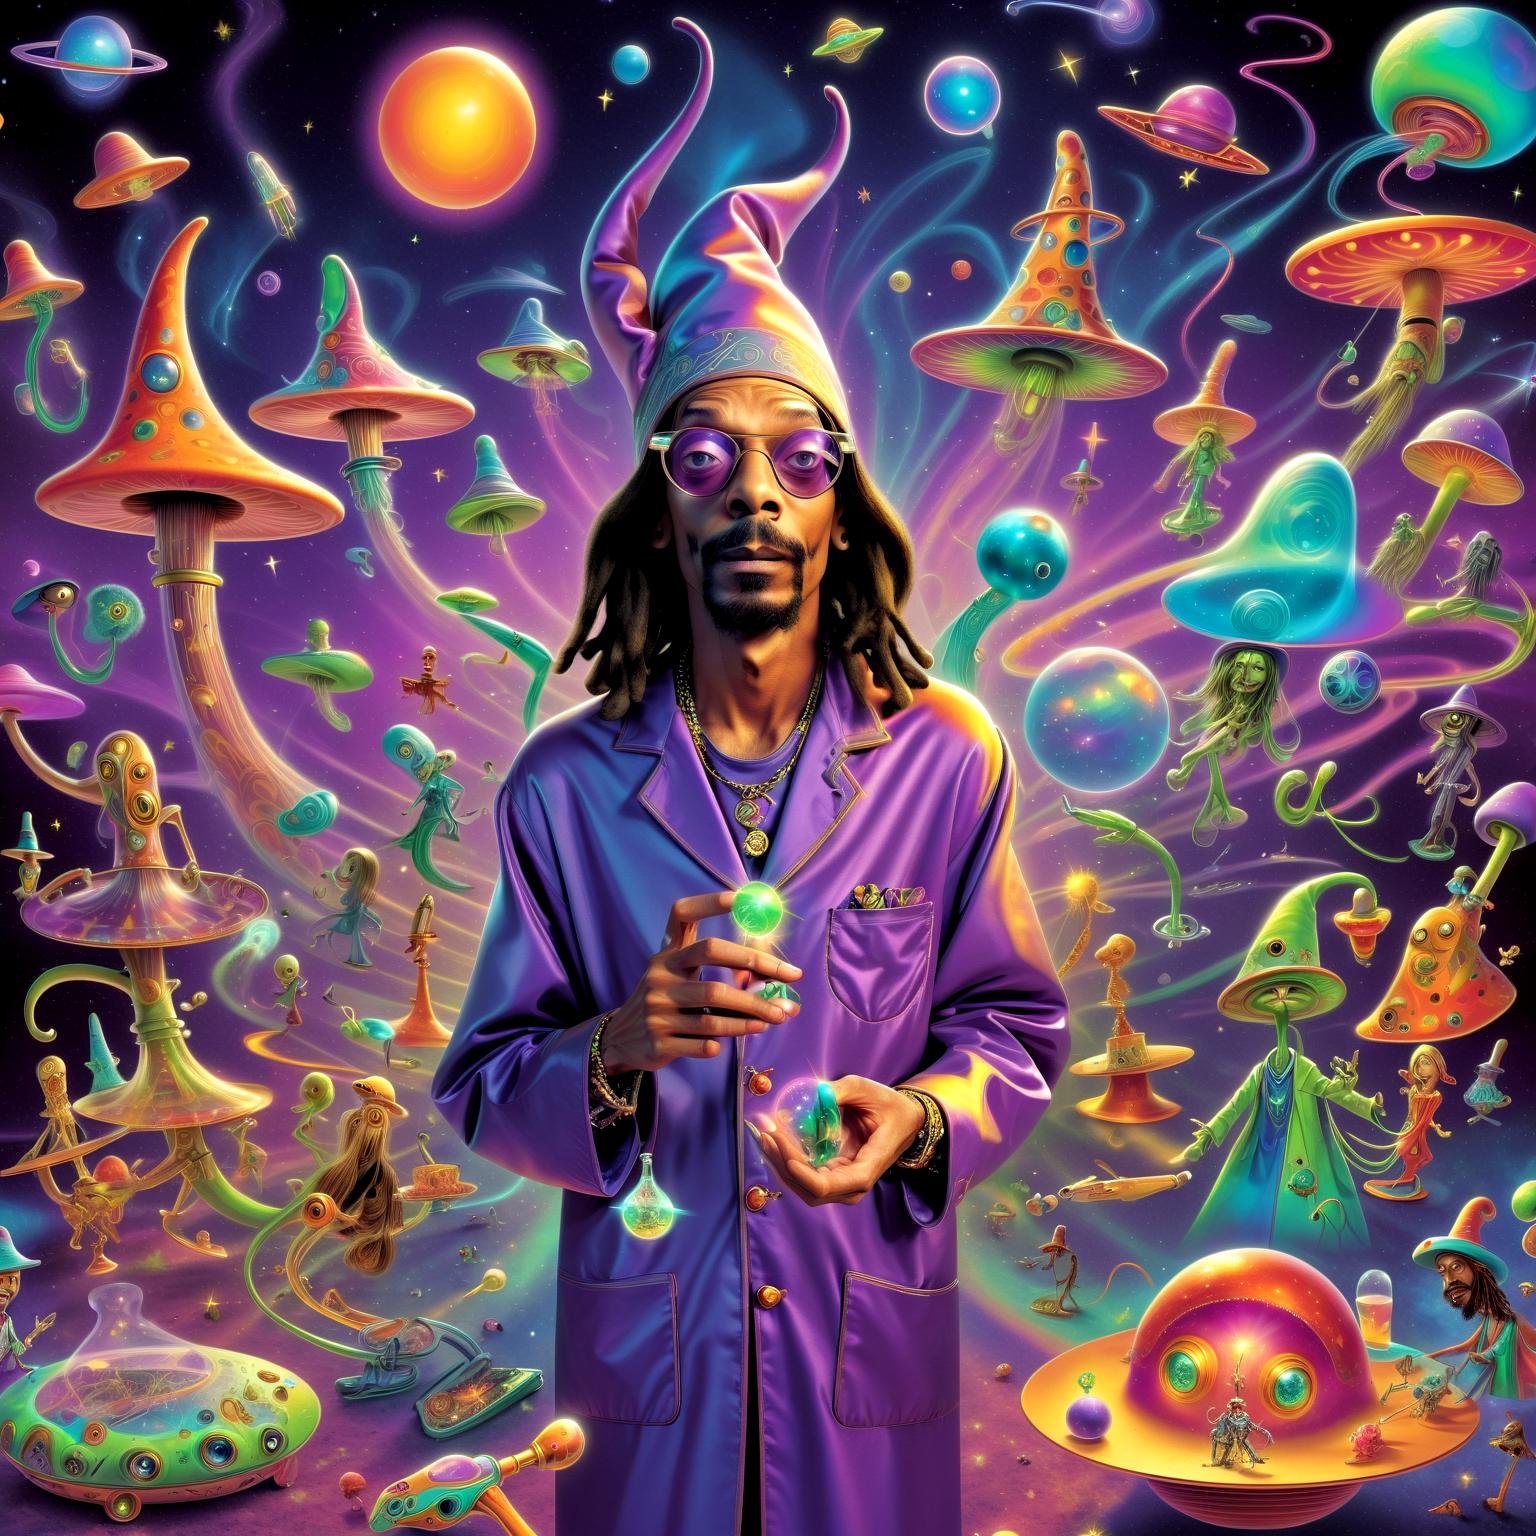 (snoop dog:1.15) dressed as wizard conjure technicolor spells, aliens experiment with bizarre contraptions, and a girl enters a whimsical trance. Everything warps into surreal caricatures as they journey through LSD-inspired realms. Mushroom-shaped planets, giggling stars, and neon gecko set the stage for their psychedelic escapade,crazy wide open eyes,in style of(bangerooo:1.15), ,